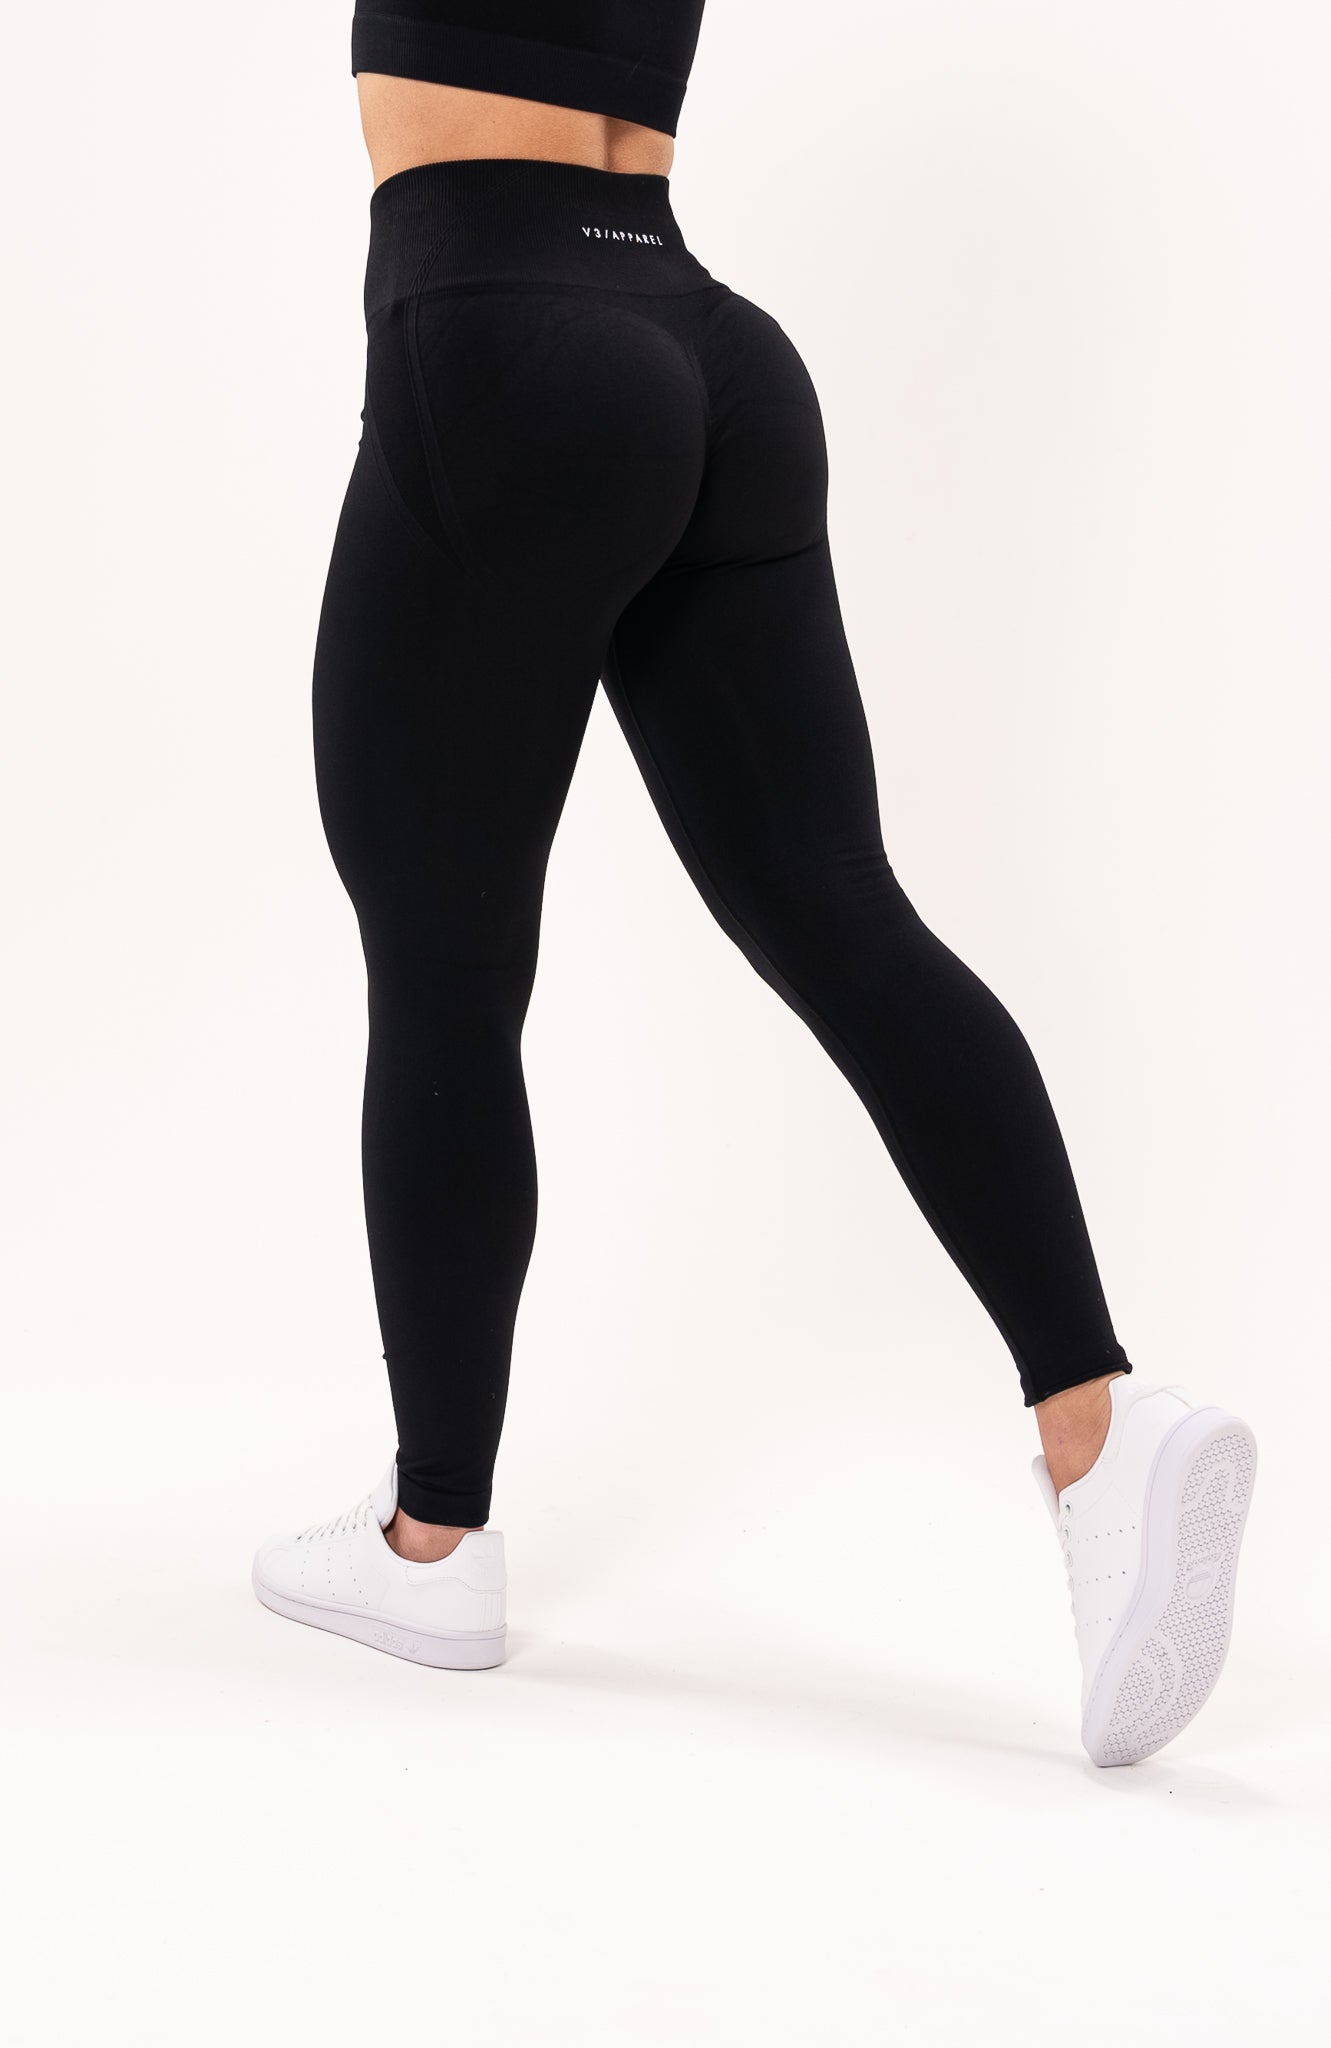 redbaysand Women's Tempo seamless scrunch bum shaping high waisted leggings in black – Squat proof sports tights for Gym workouts training, Running, yoga, bodybuilding and bikini fitness.